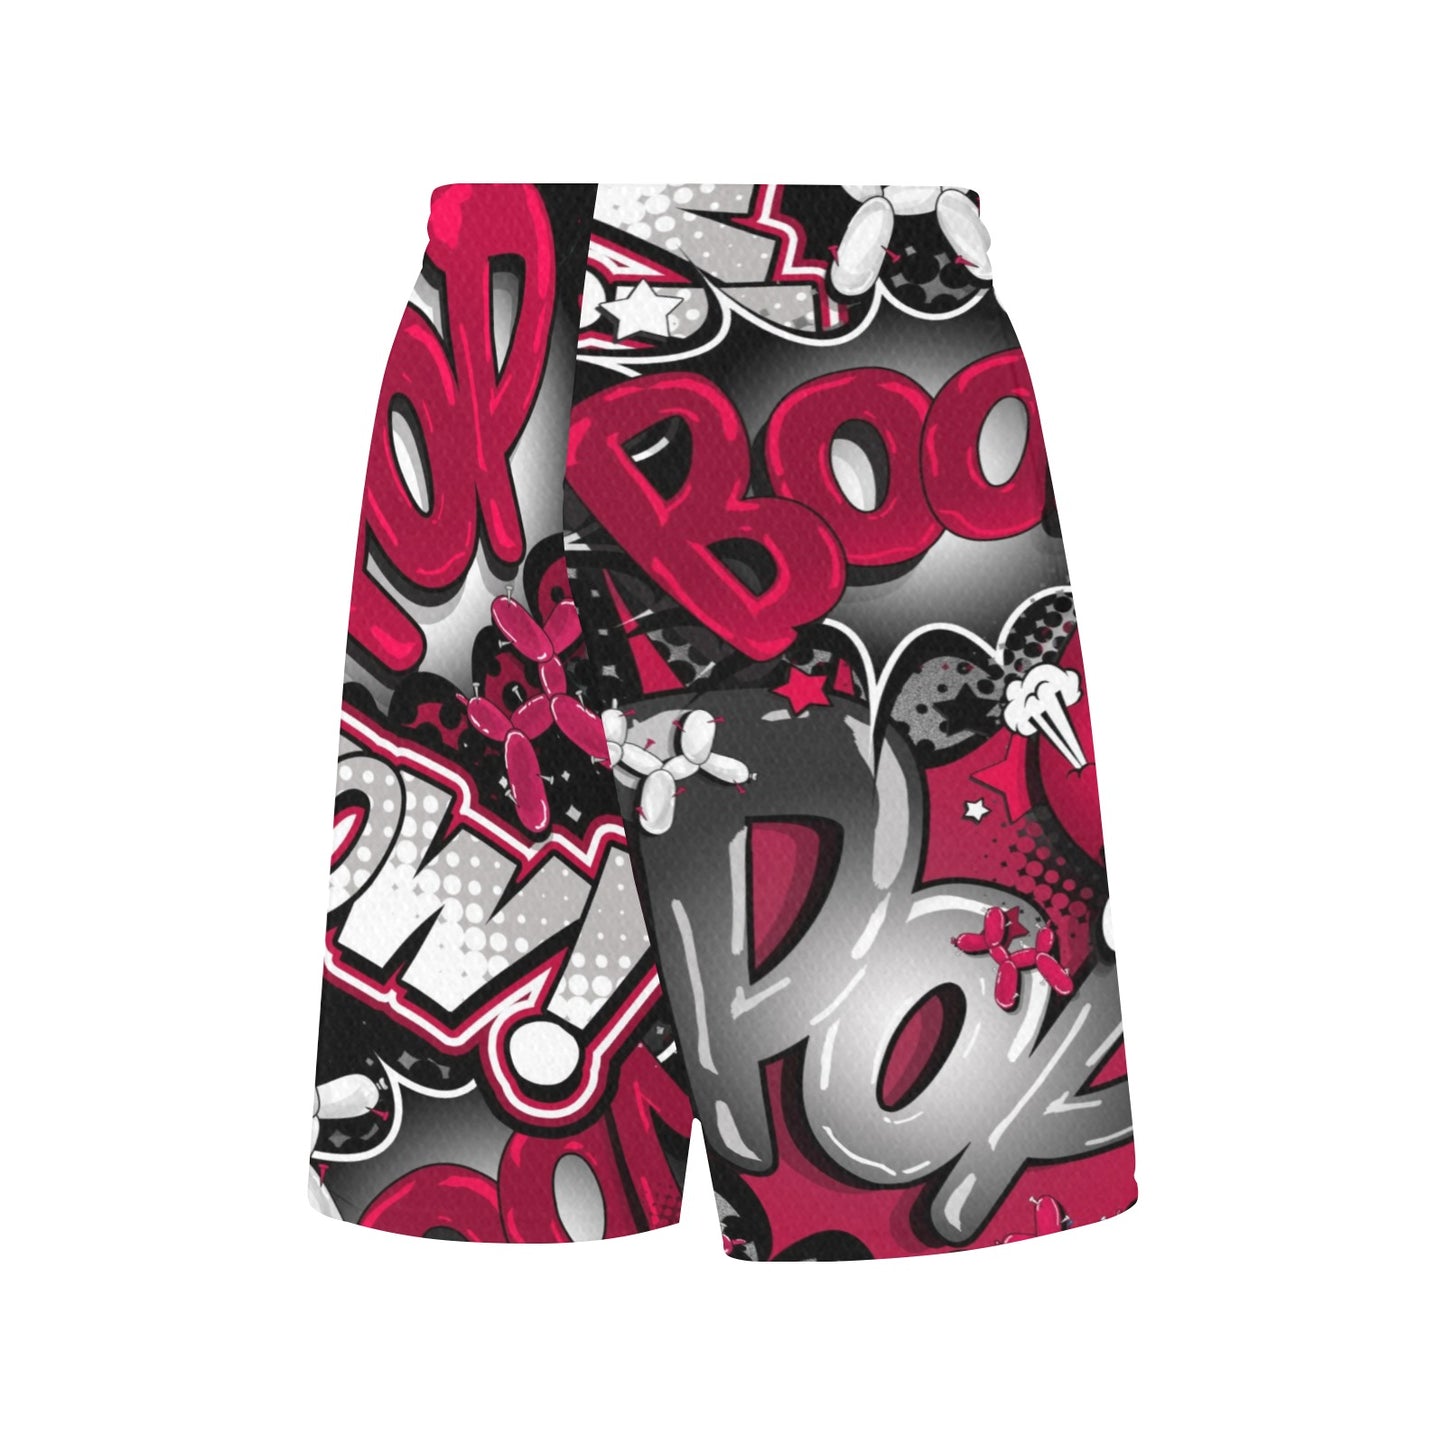 JImmy BOOM! Red and Black balloon twisting shorts